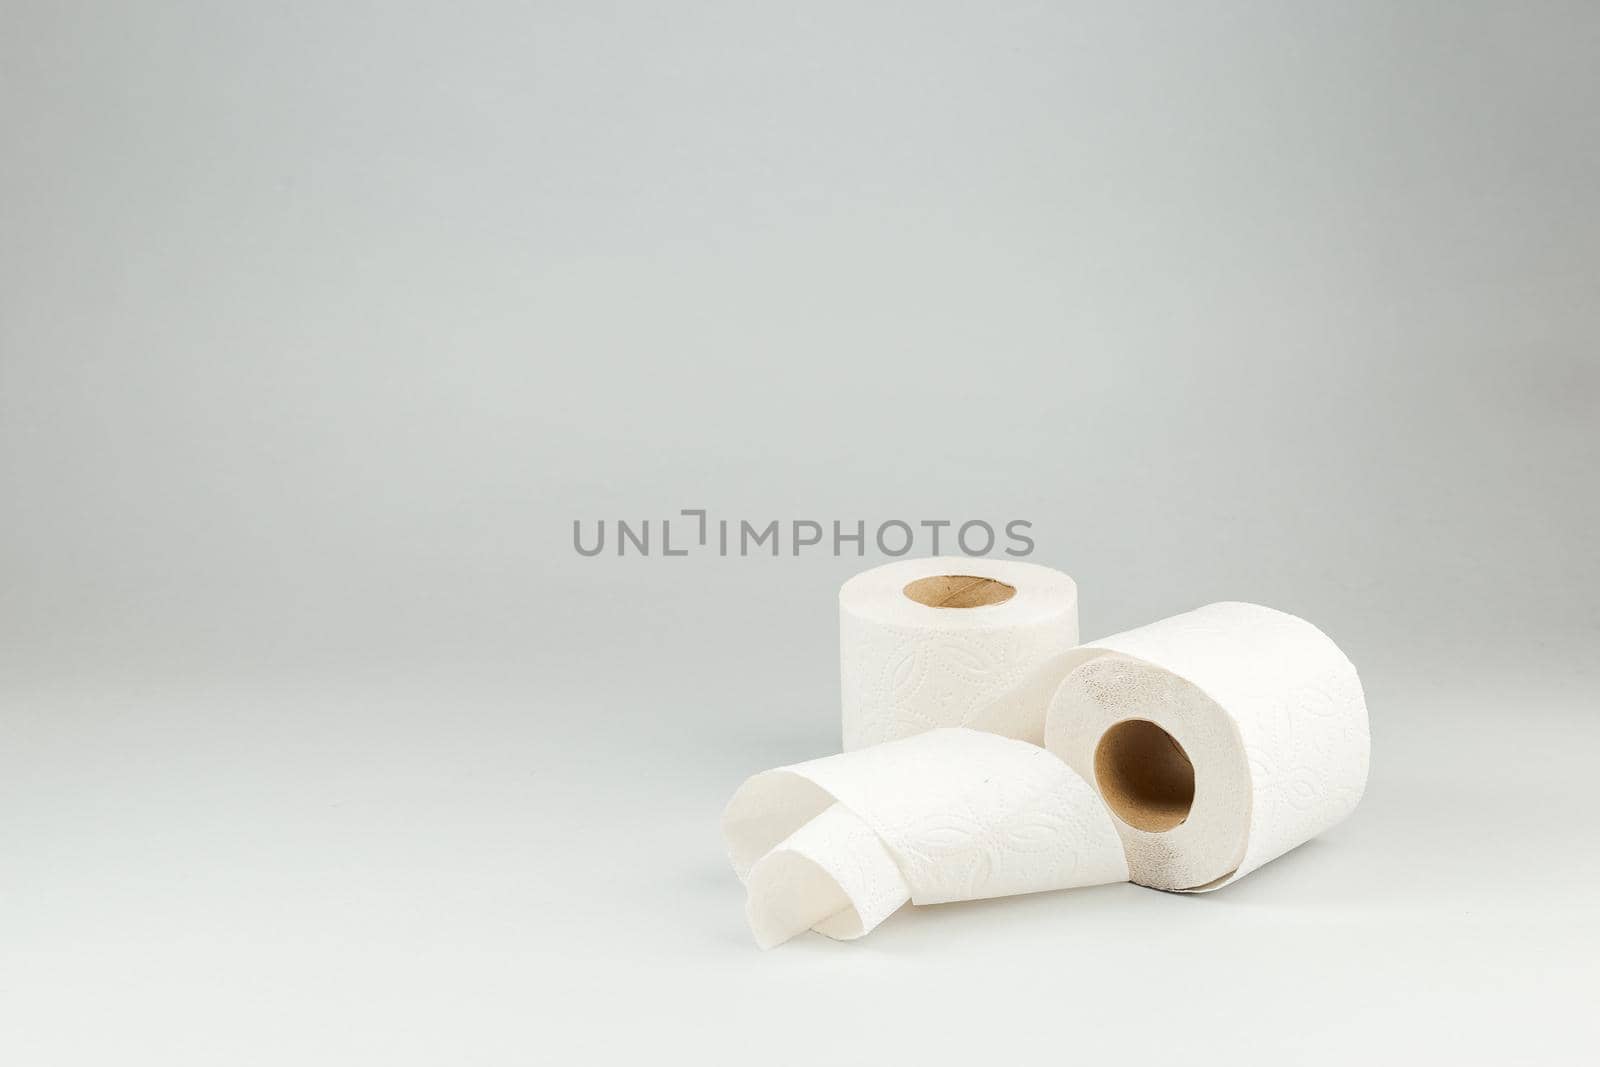 Two Rolls of White Toilet Paper over Gray Background. Copy Space for text